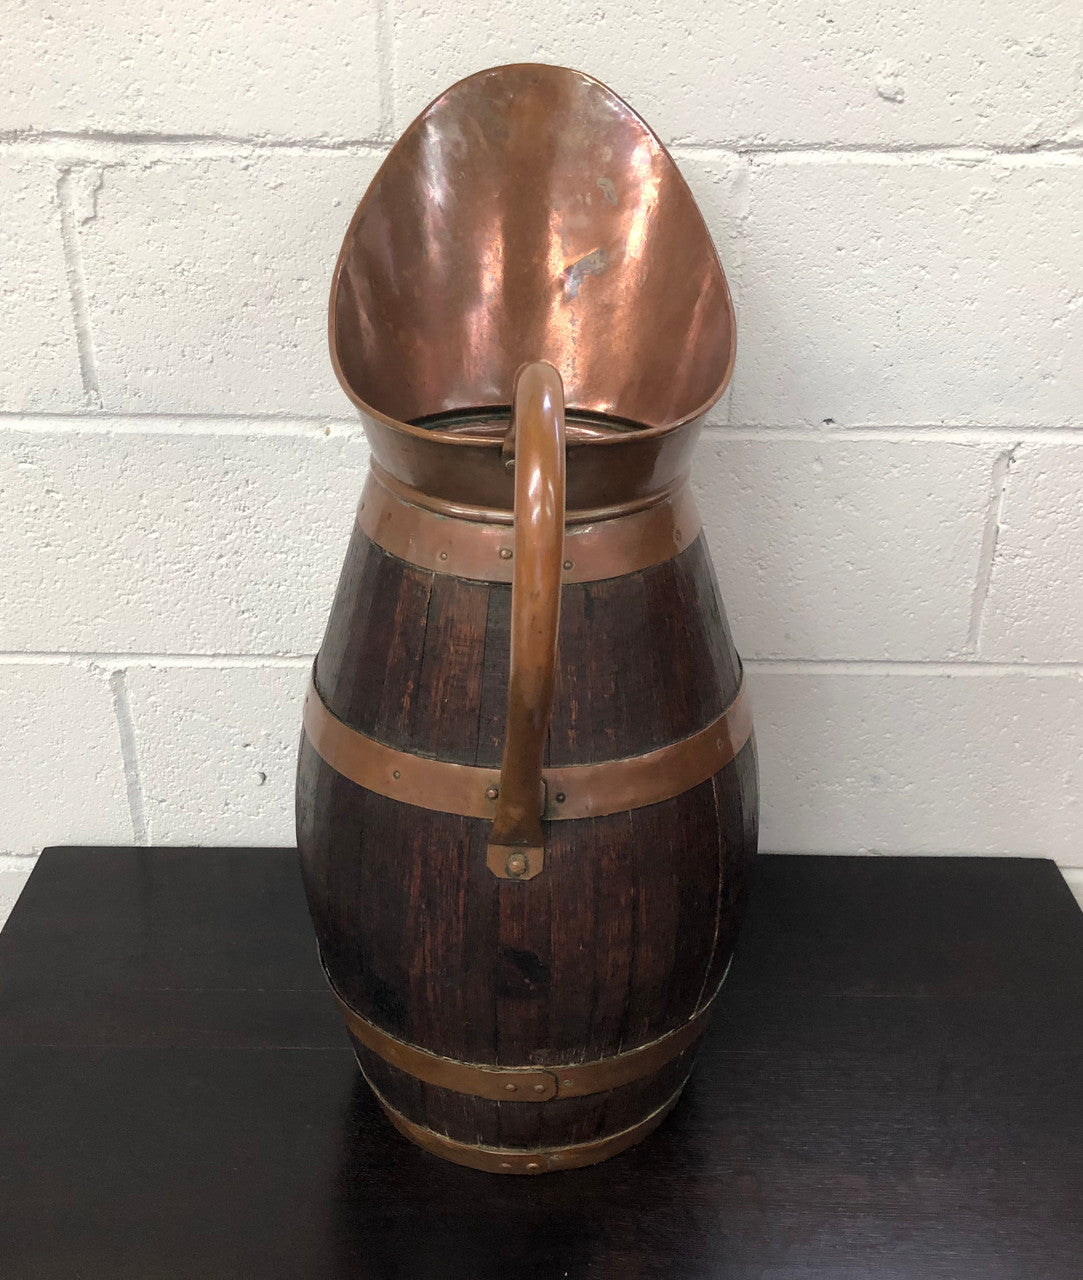 French Oak coopered with copper large jug. In good original condition.